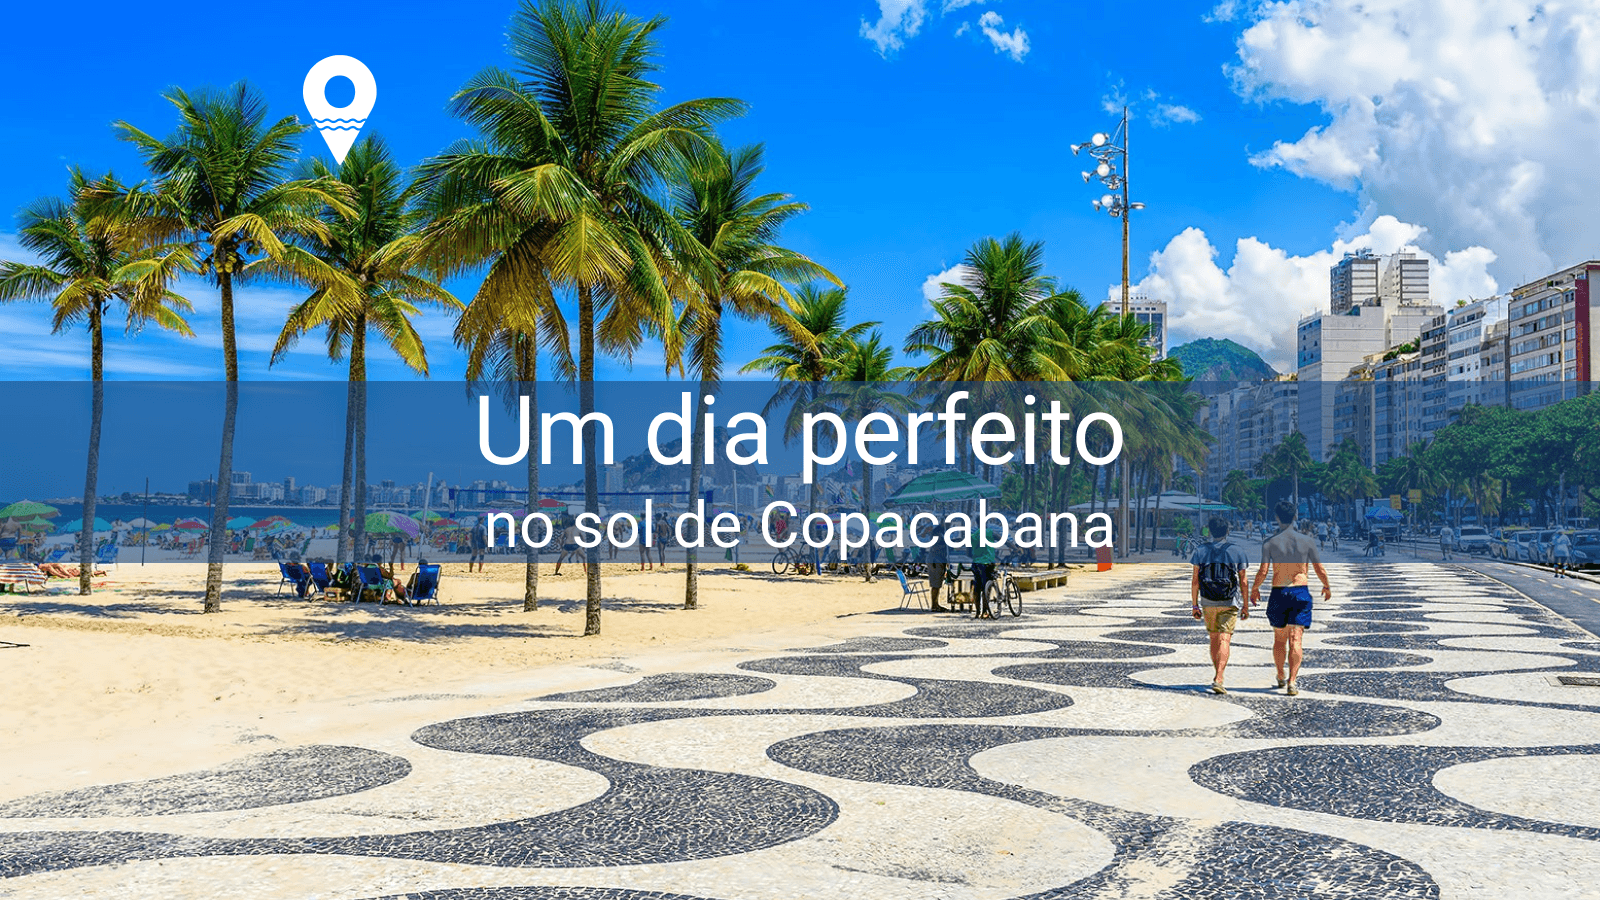 Itinerary for a perfect day in Copcabana!